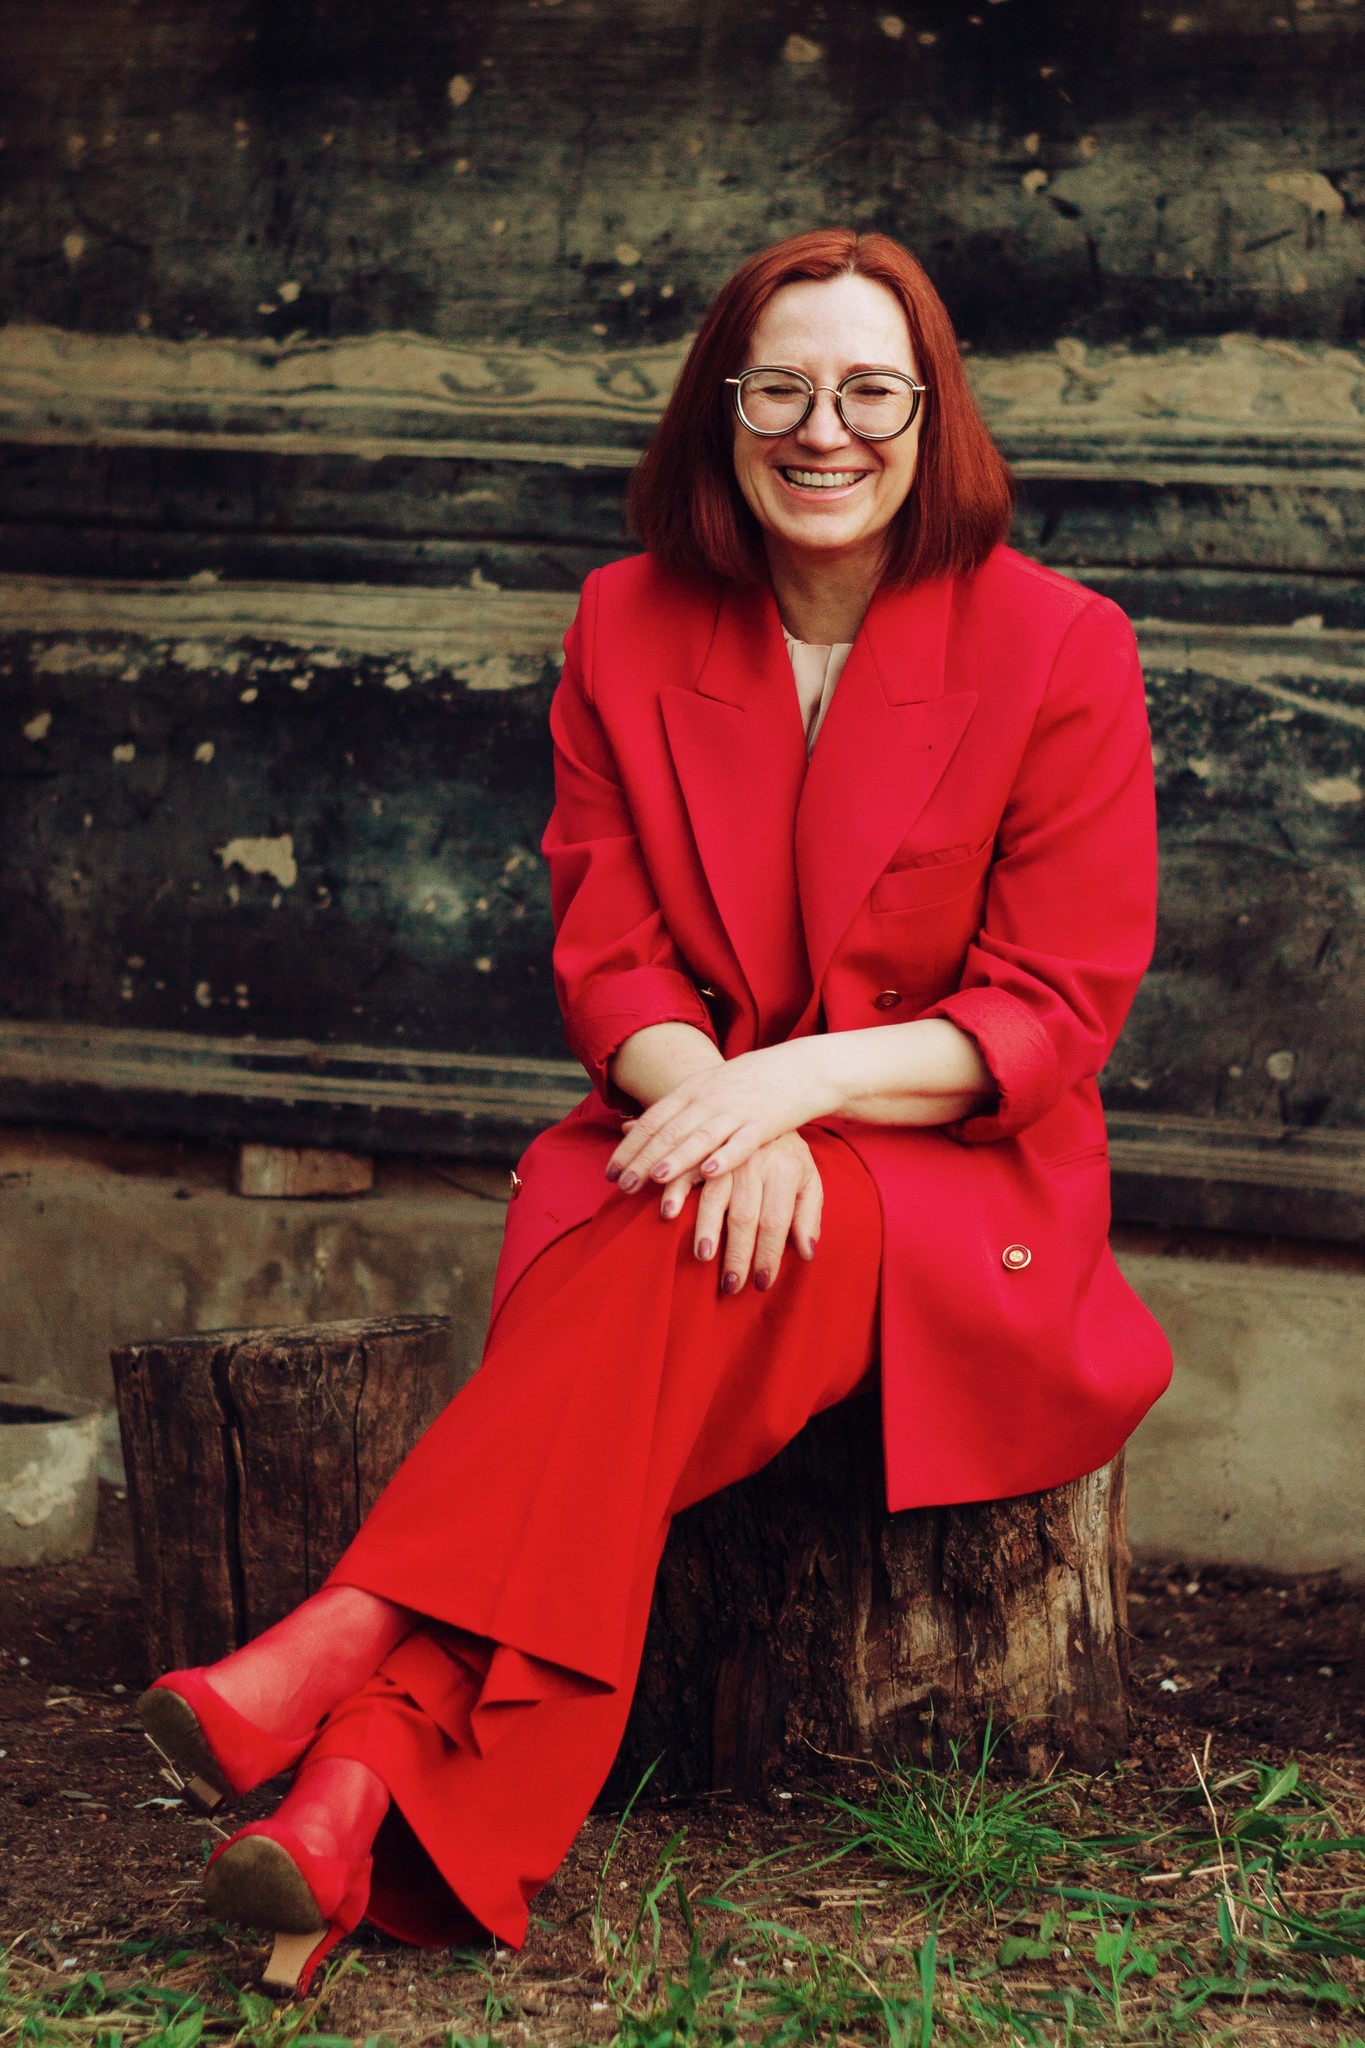 Woman wearing a red suit